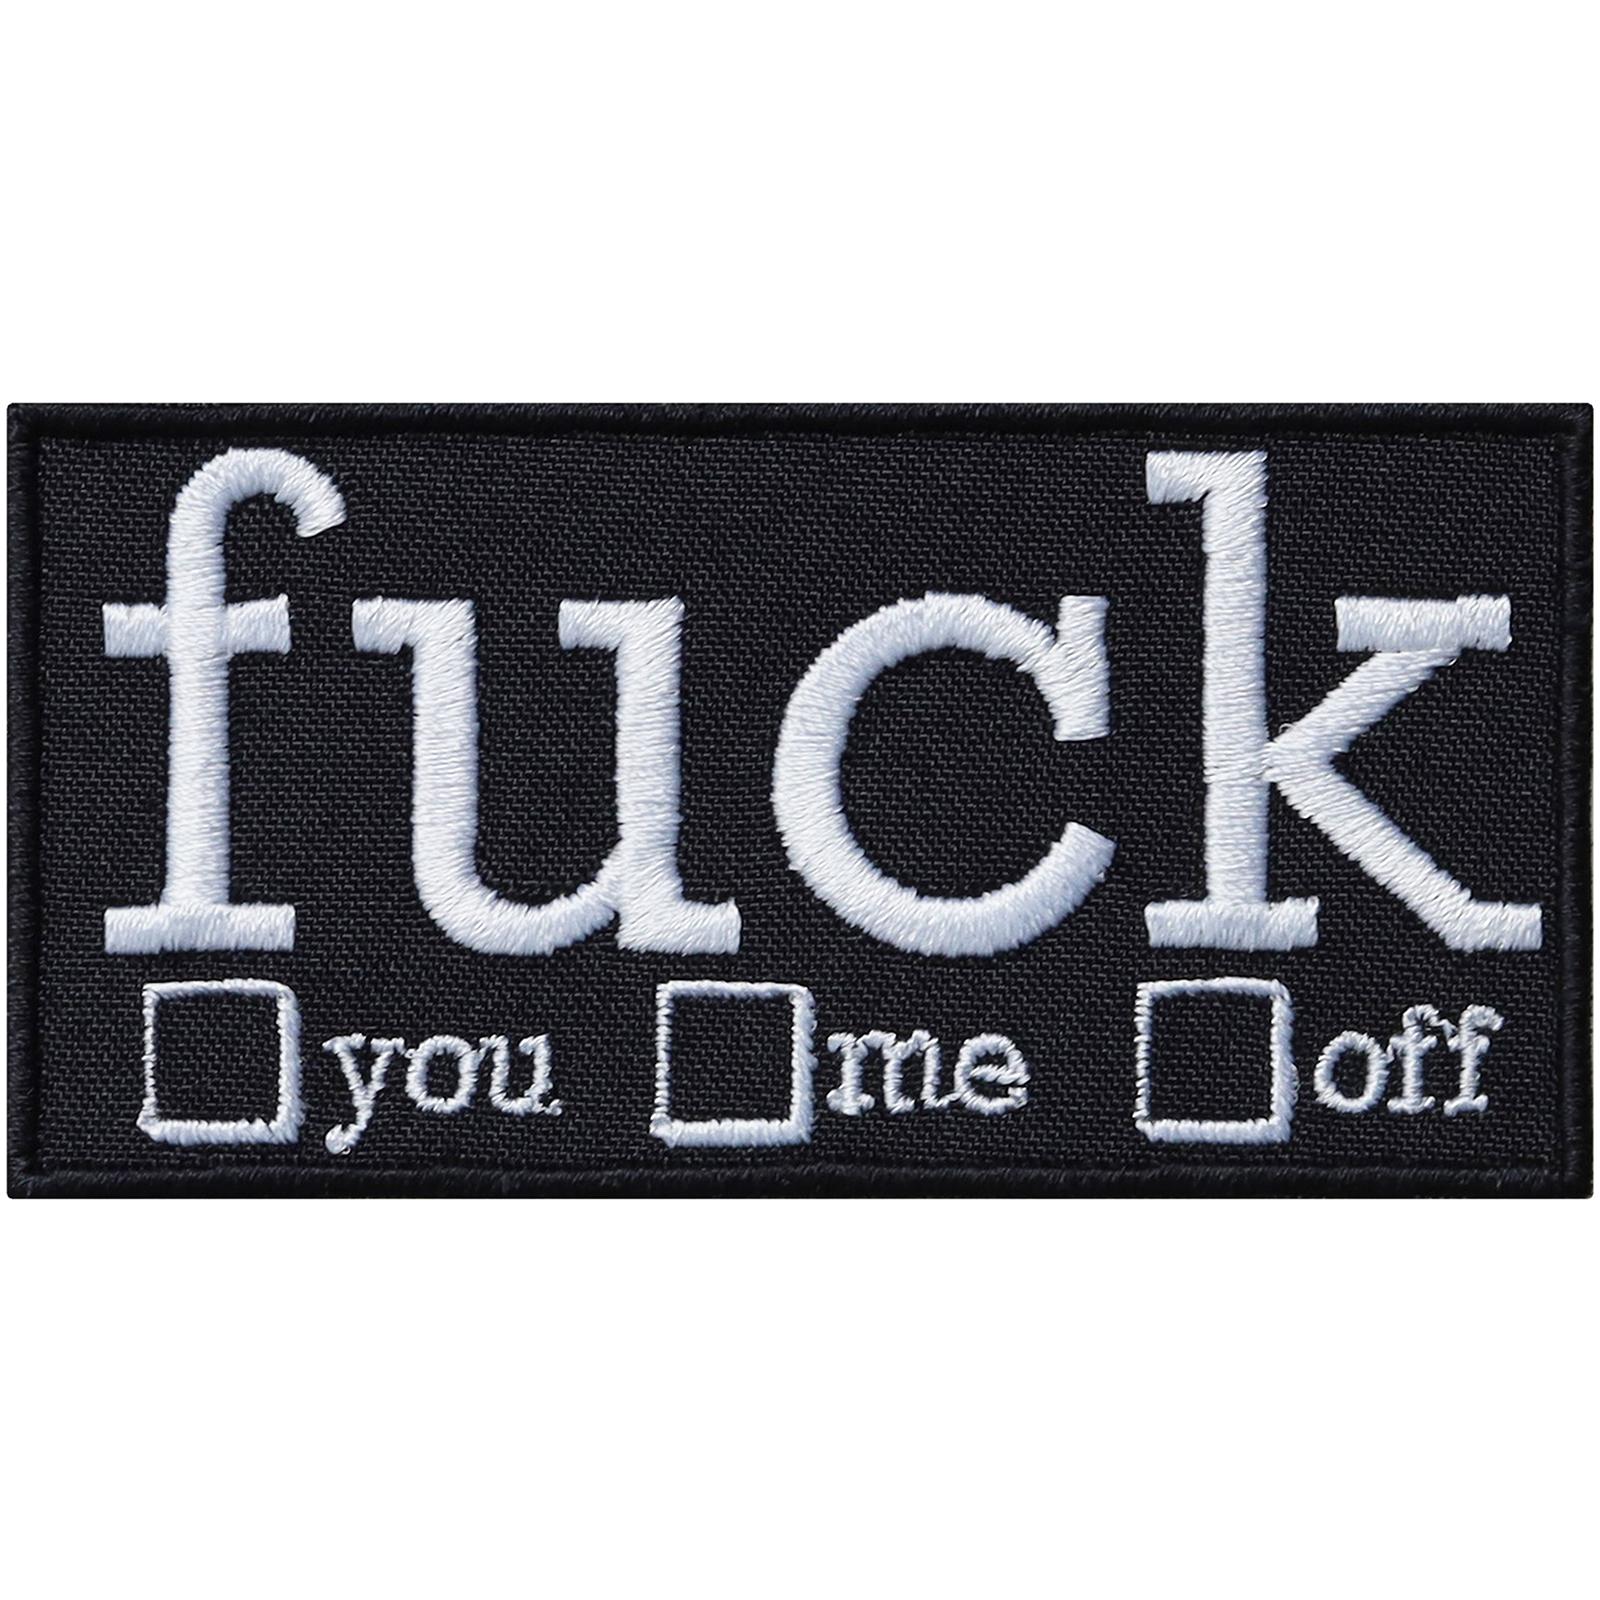 Fuck - you/me/off - Patch